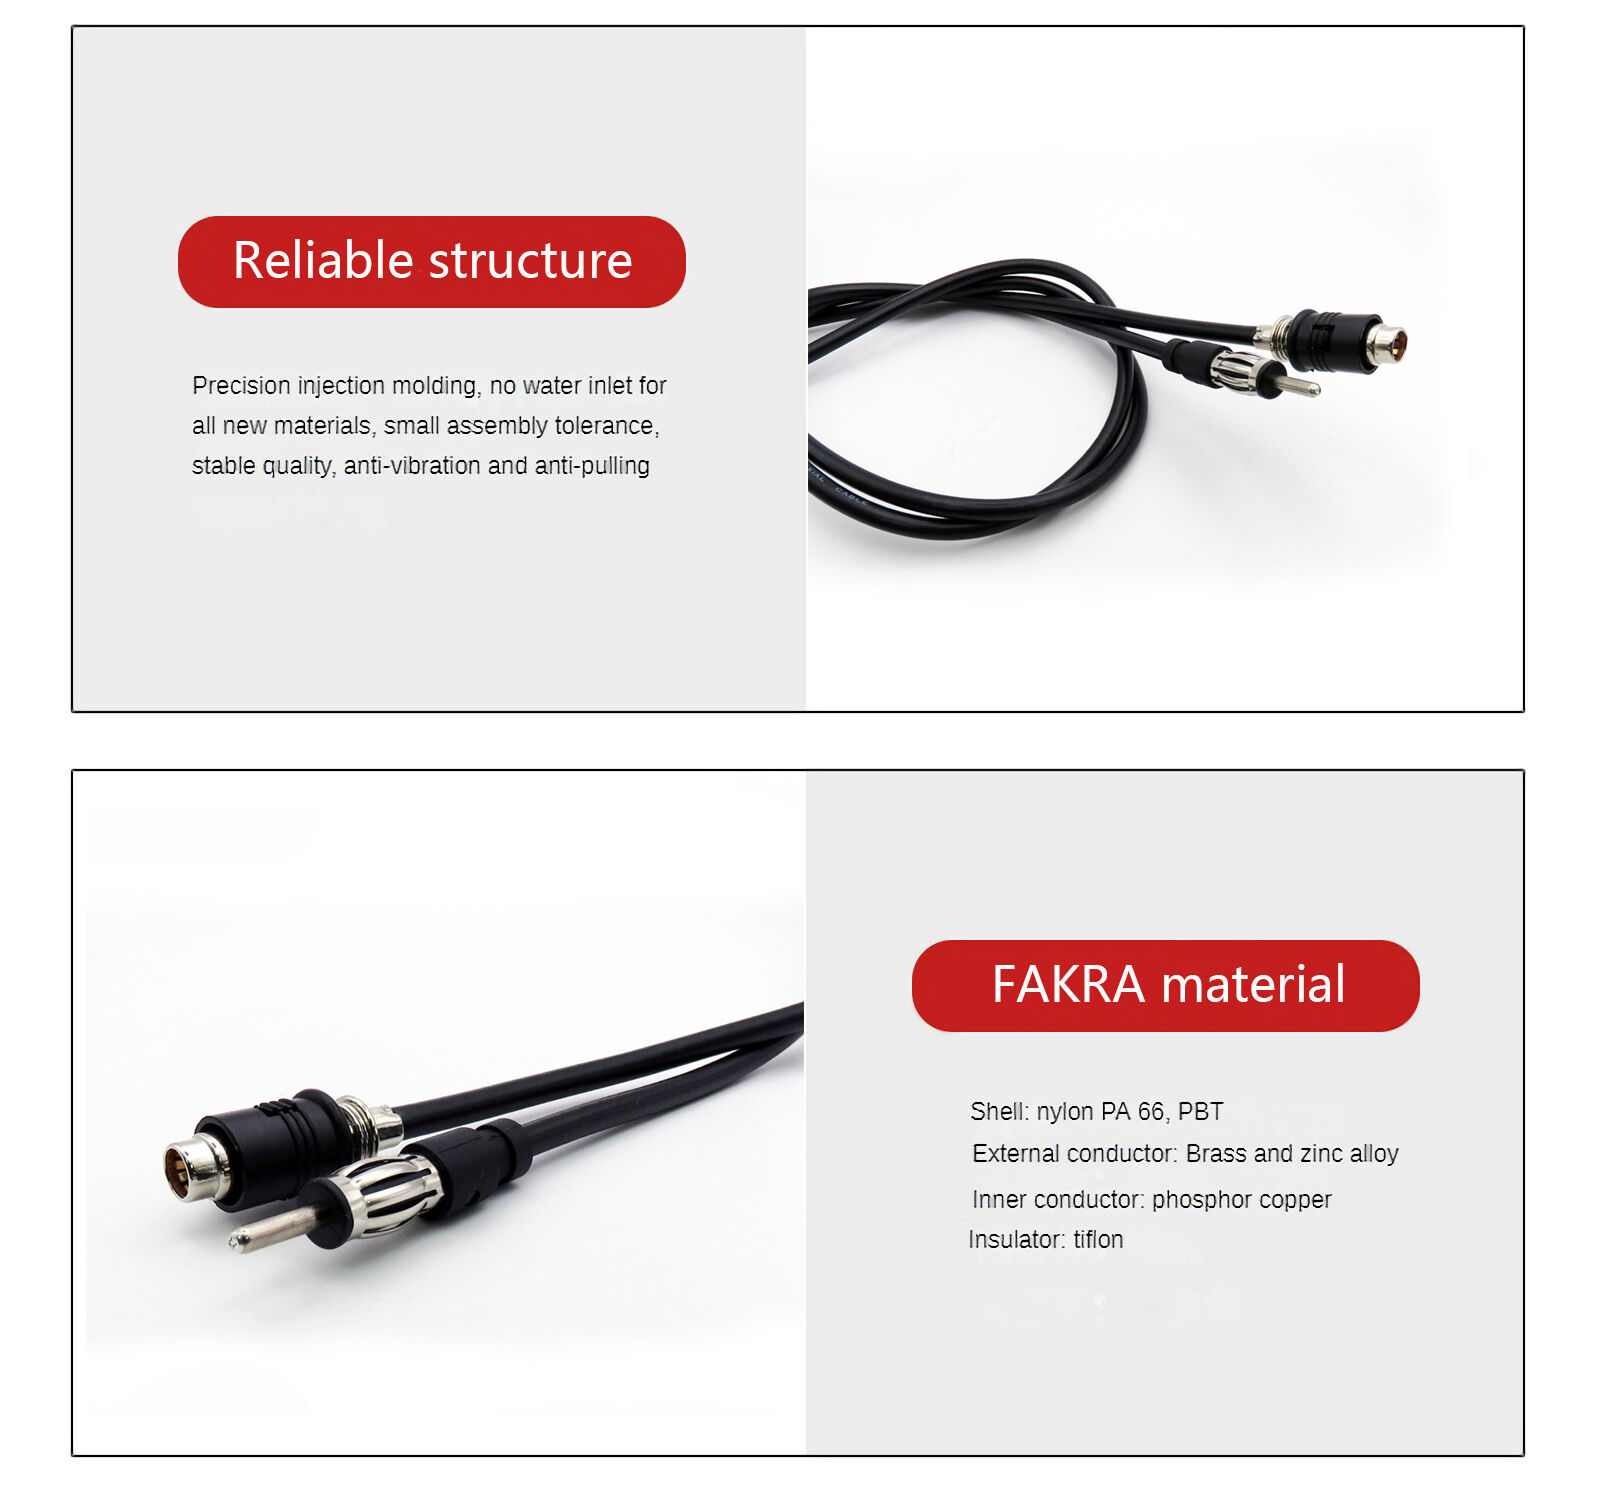 Universal Car Stereo Radio Antenna Cable Fakra Male Female to DIN Jack Plug  Connector Cable - China Male Fakra Cable, DIN Plug Cable